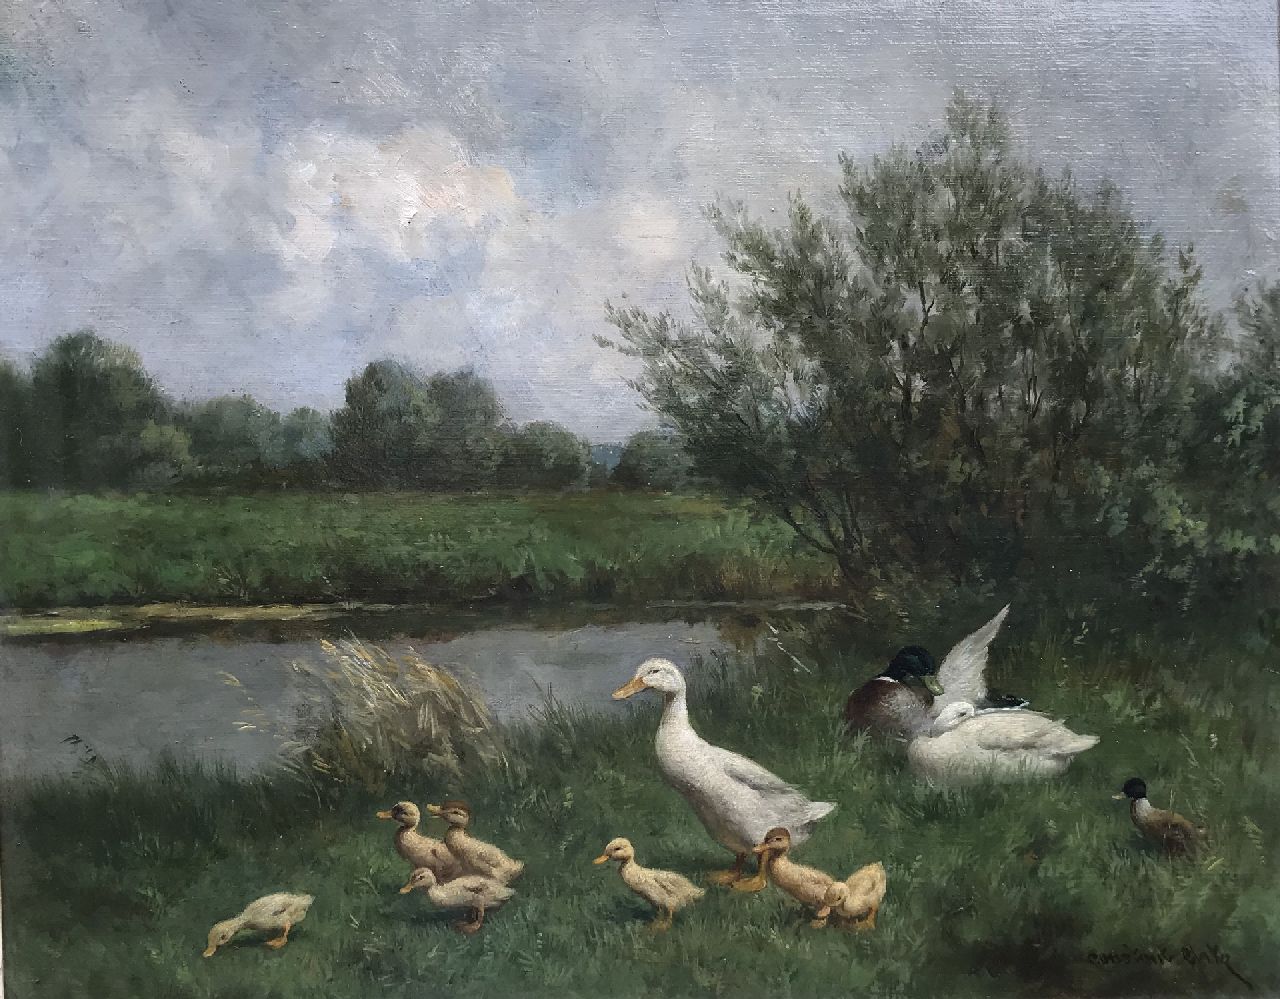 Artz C.D.L.  | 'Constant' David Ludovic Artz | Paintings offered for sale | Ducks at the waterside, oil on canvas 40.0 x 50.0 cm, signed l.r.